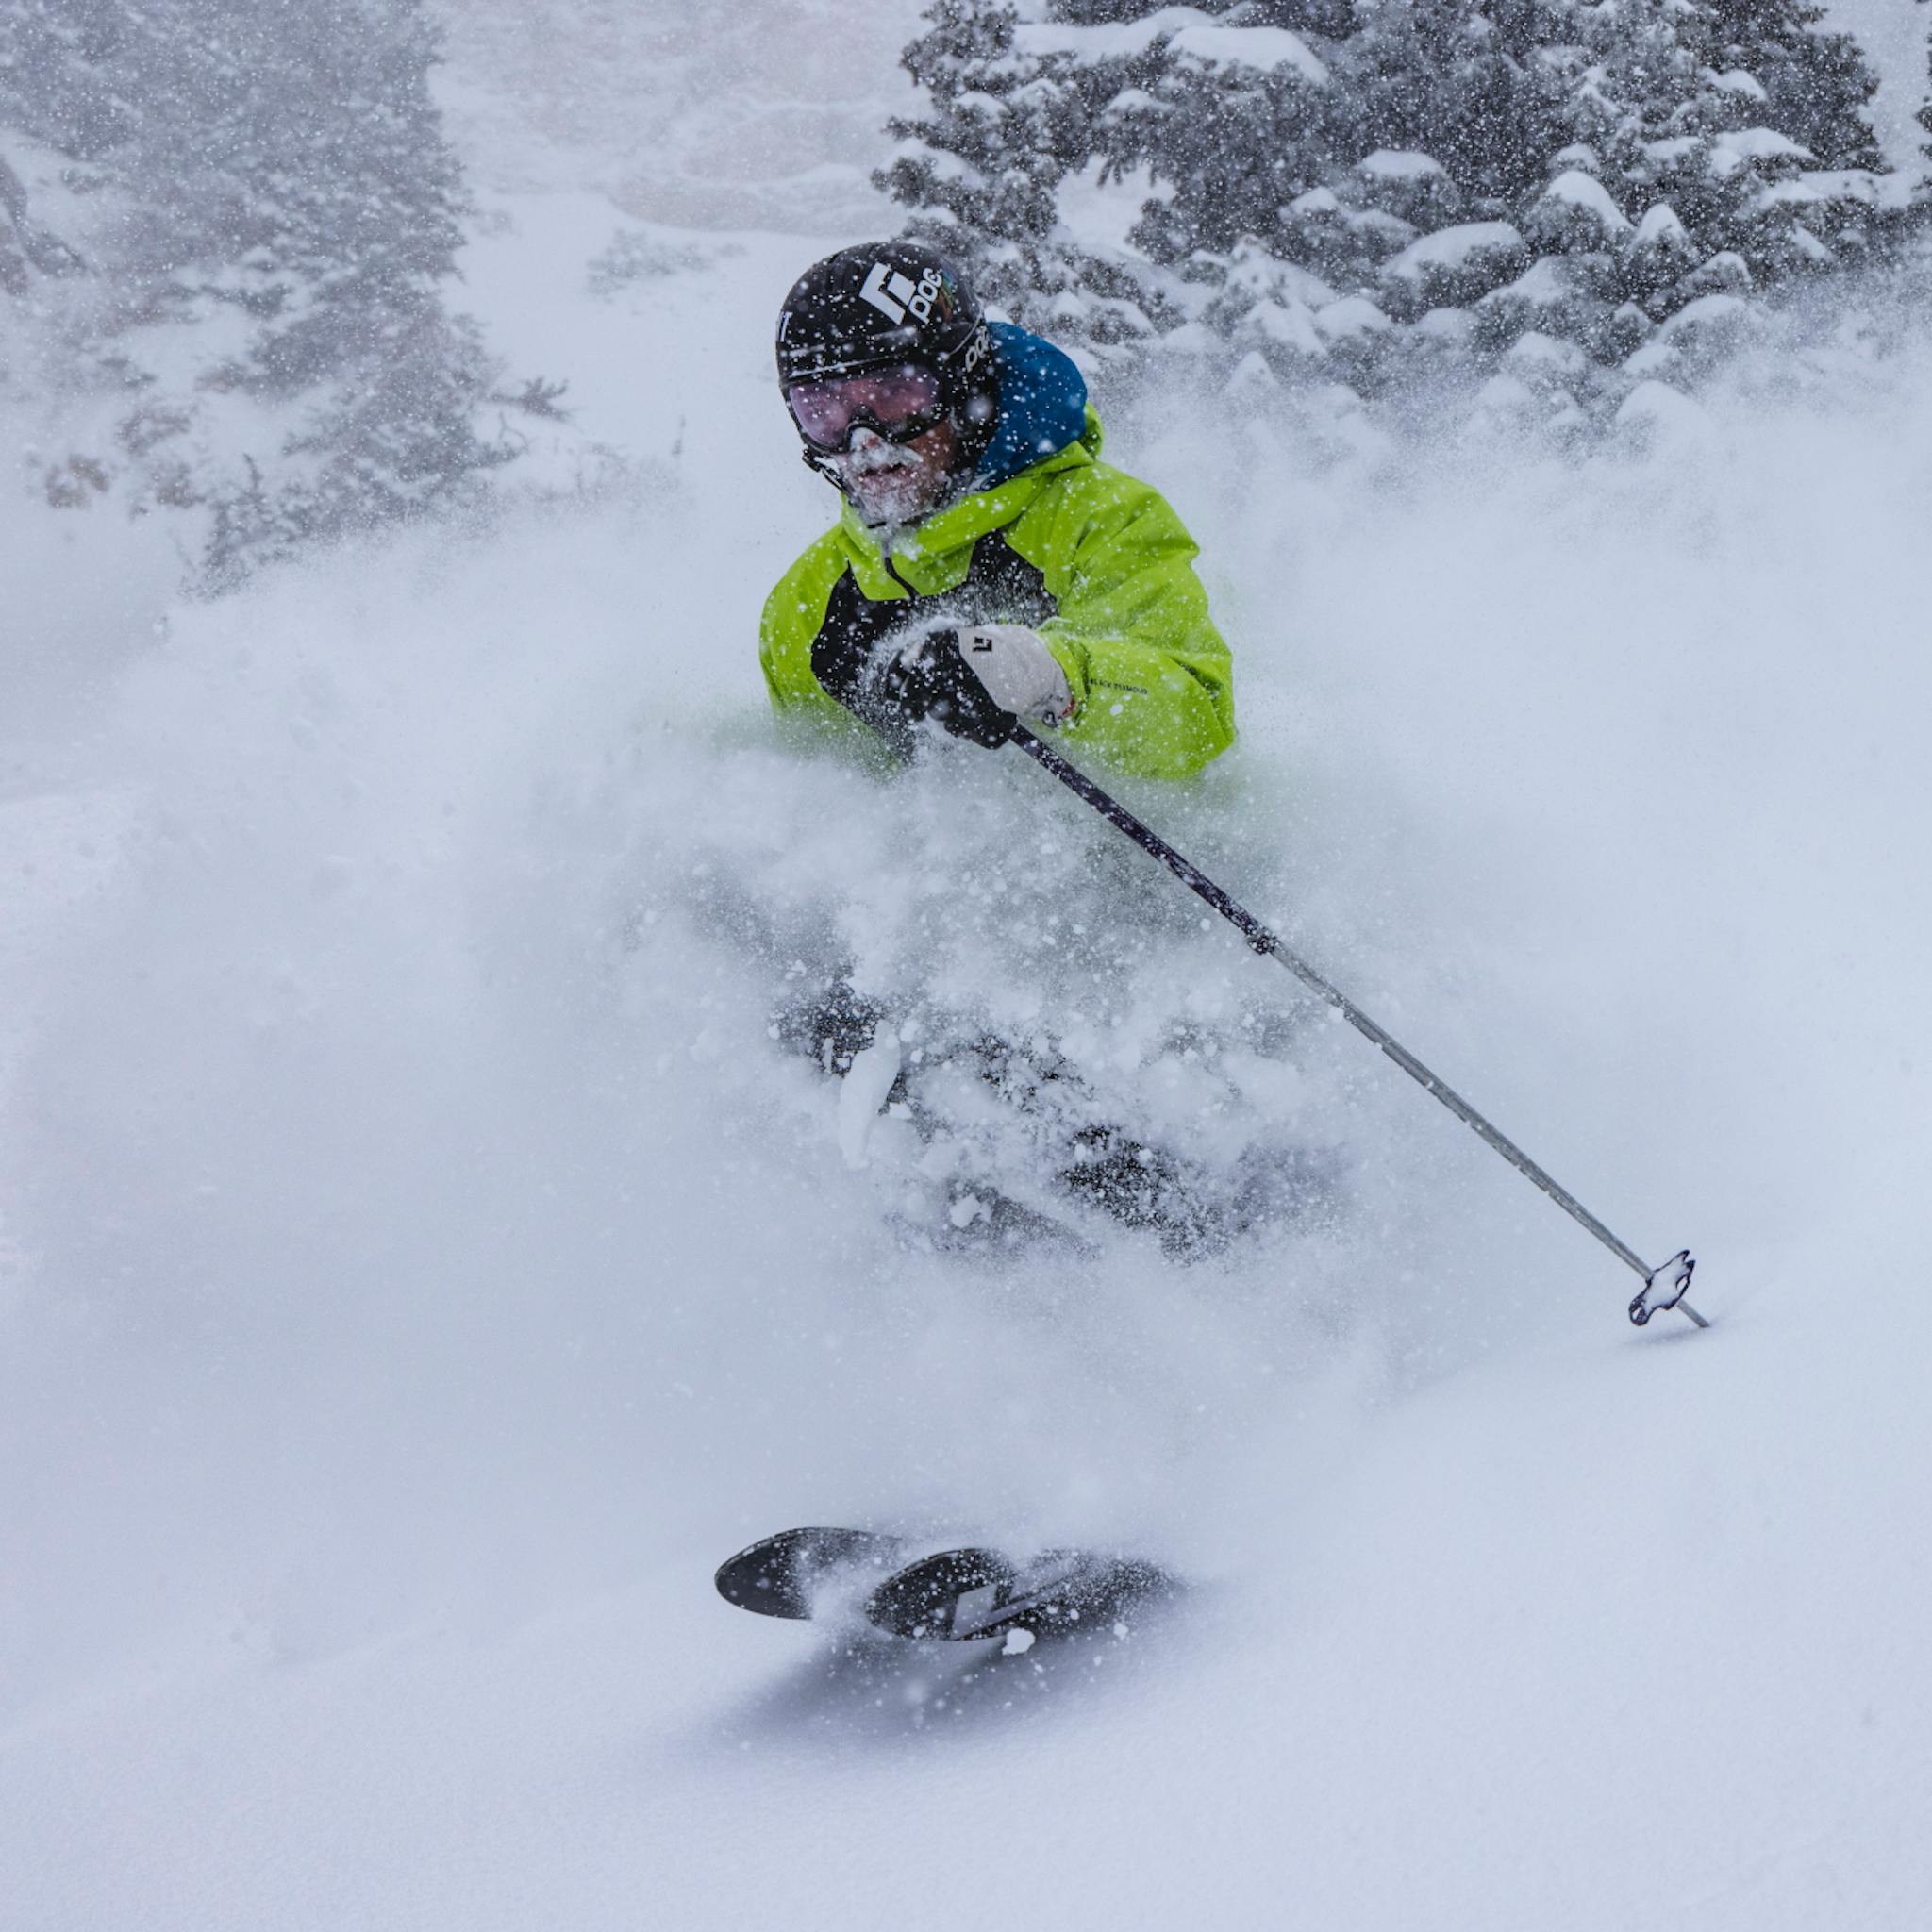 A backcountry skier getting face shots.